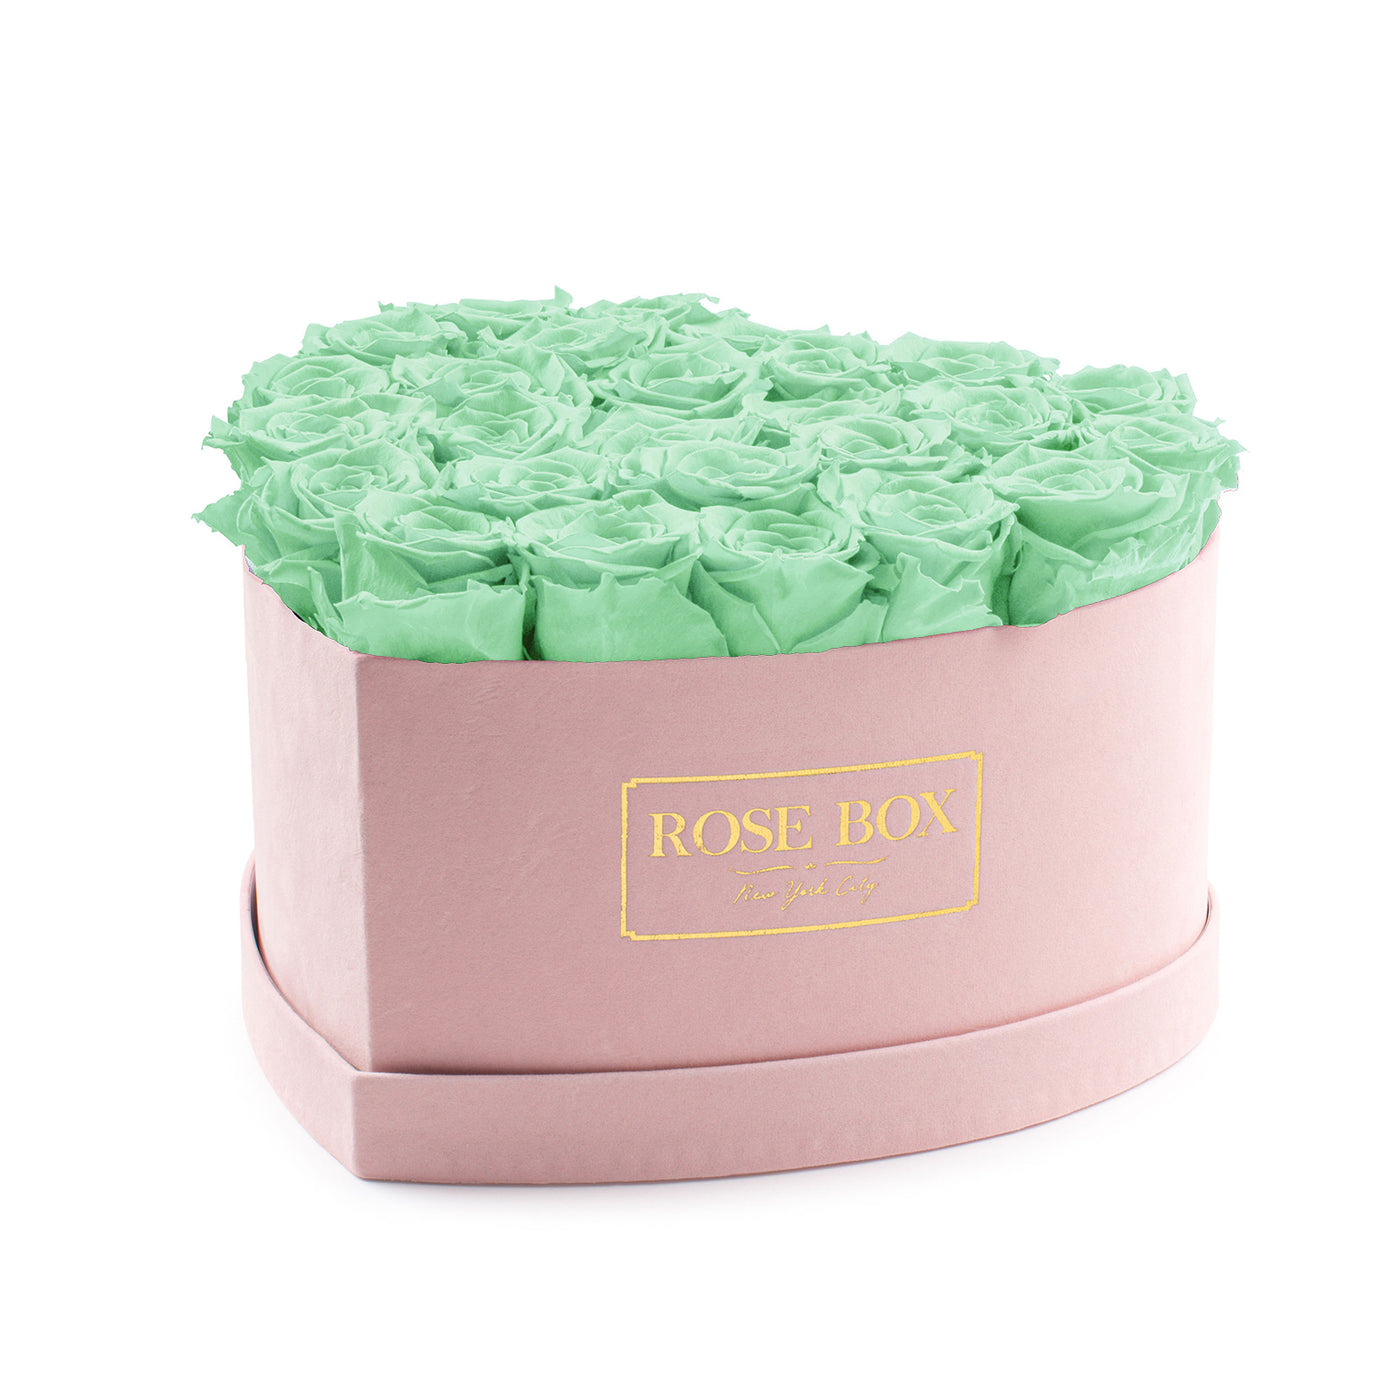 Large Pink Heart Box with Light Green Roses